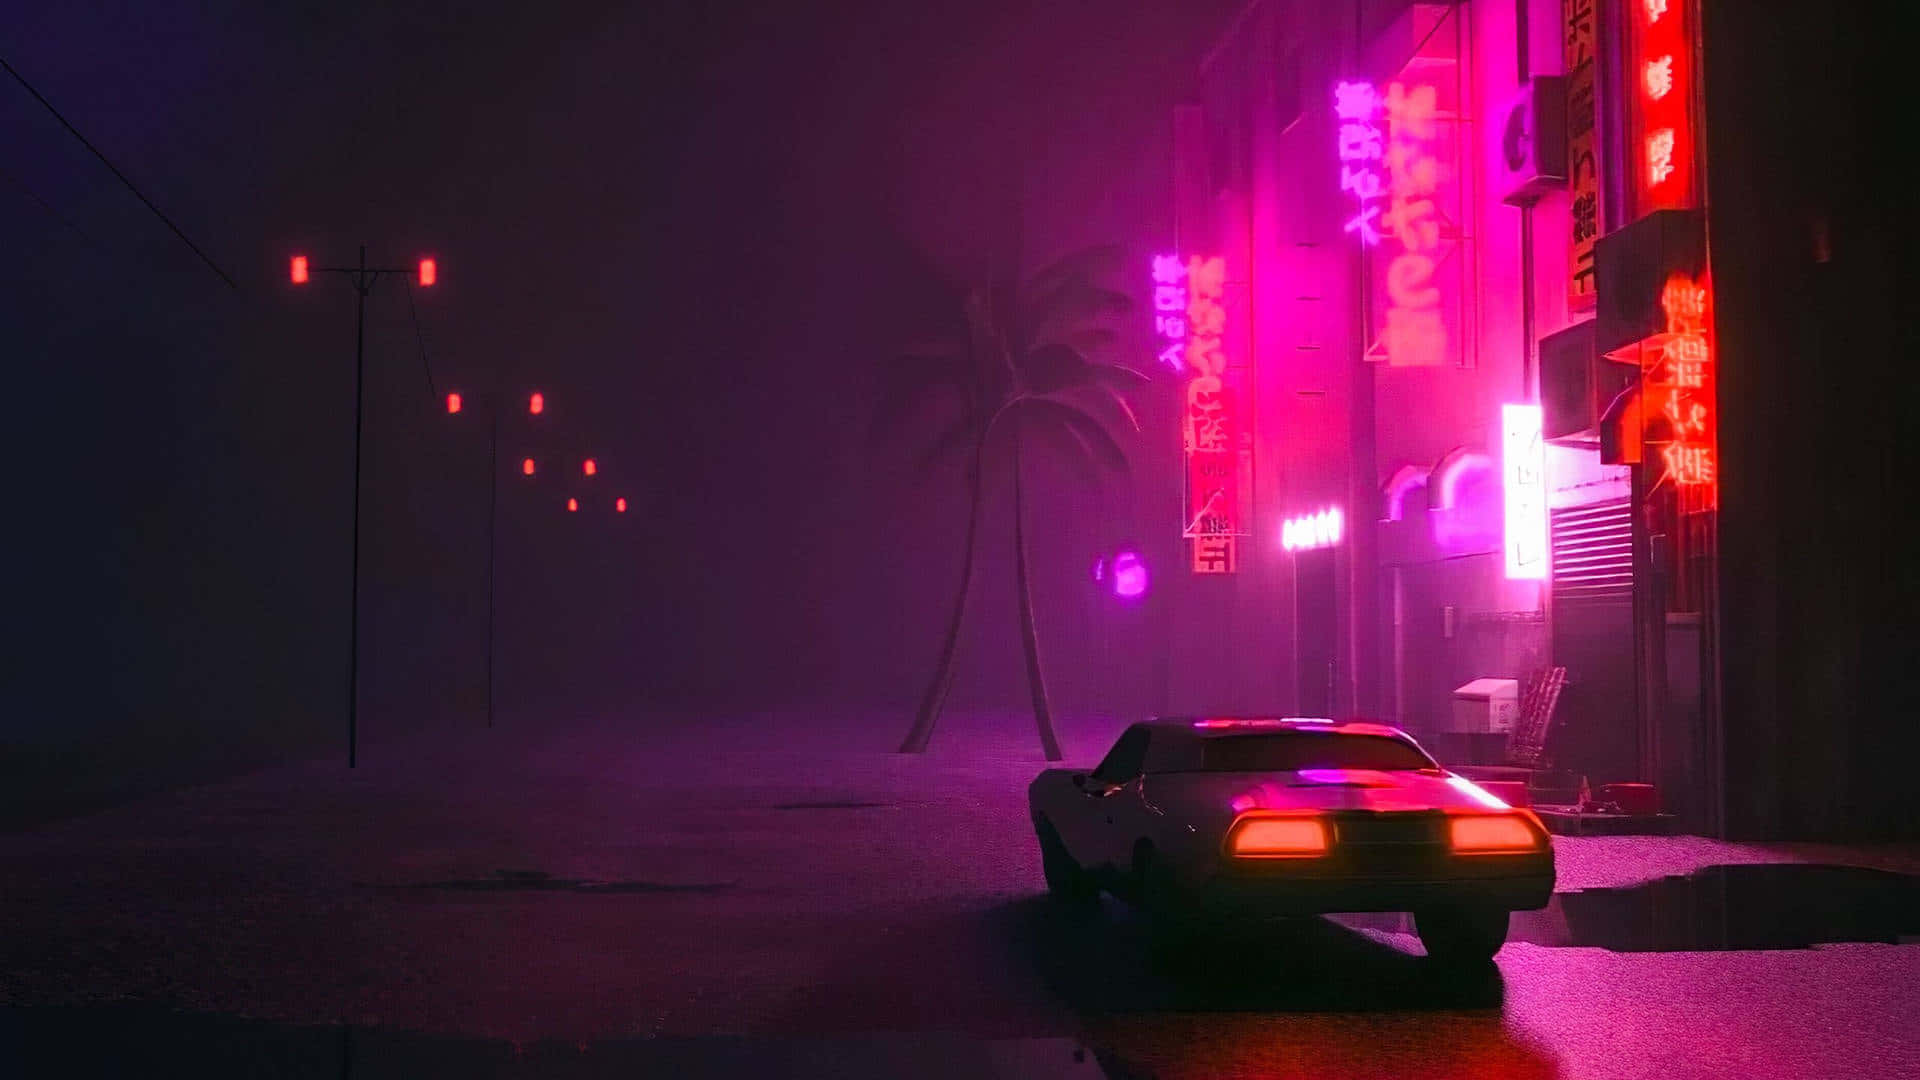 Synthwave 1920 X 1080 Wallpaper